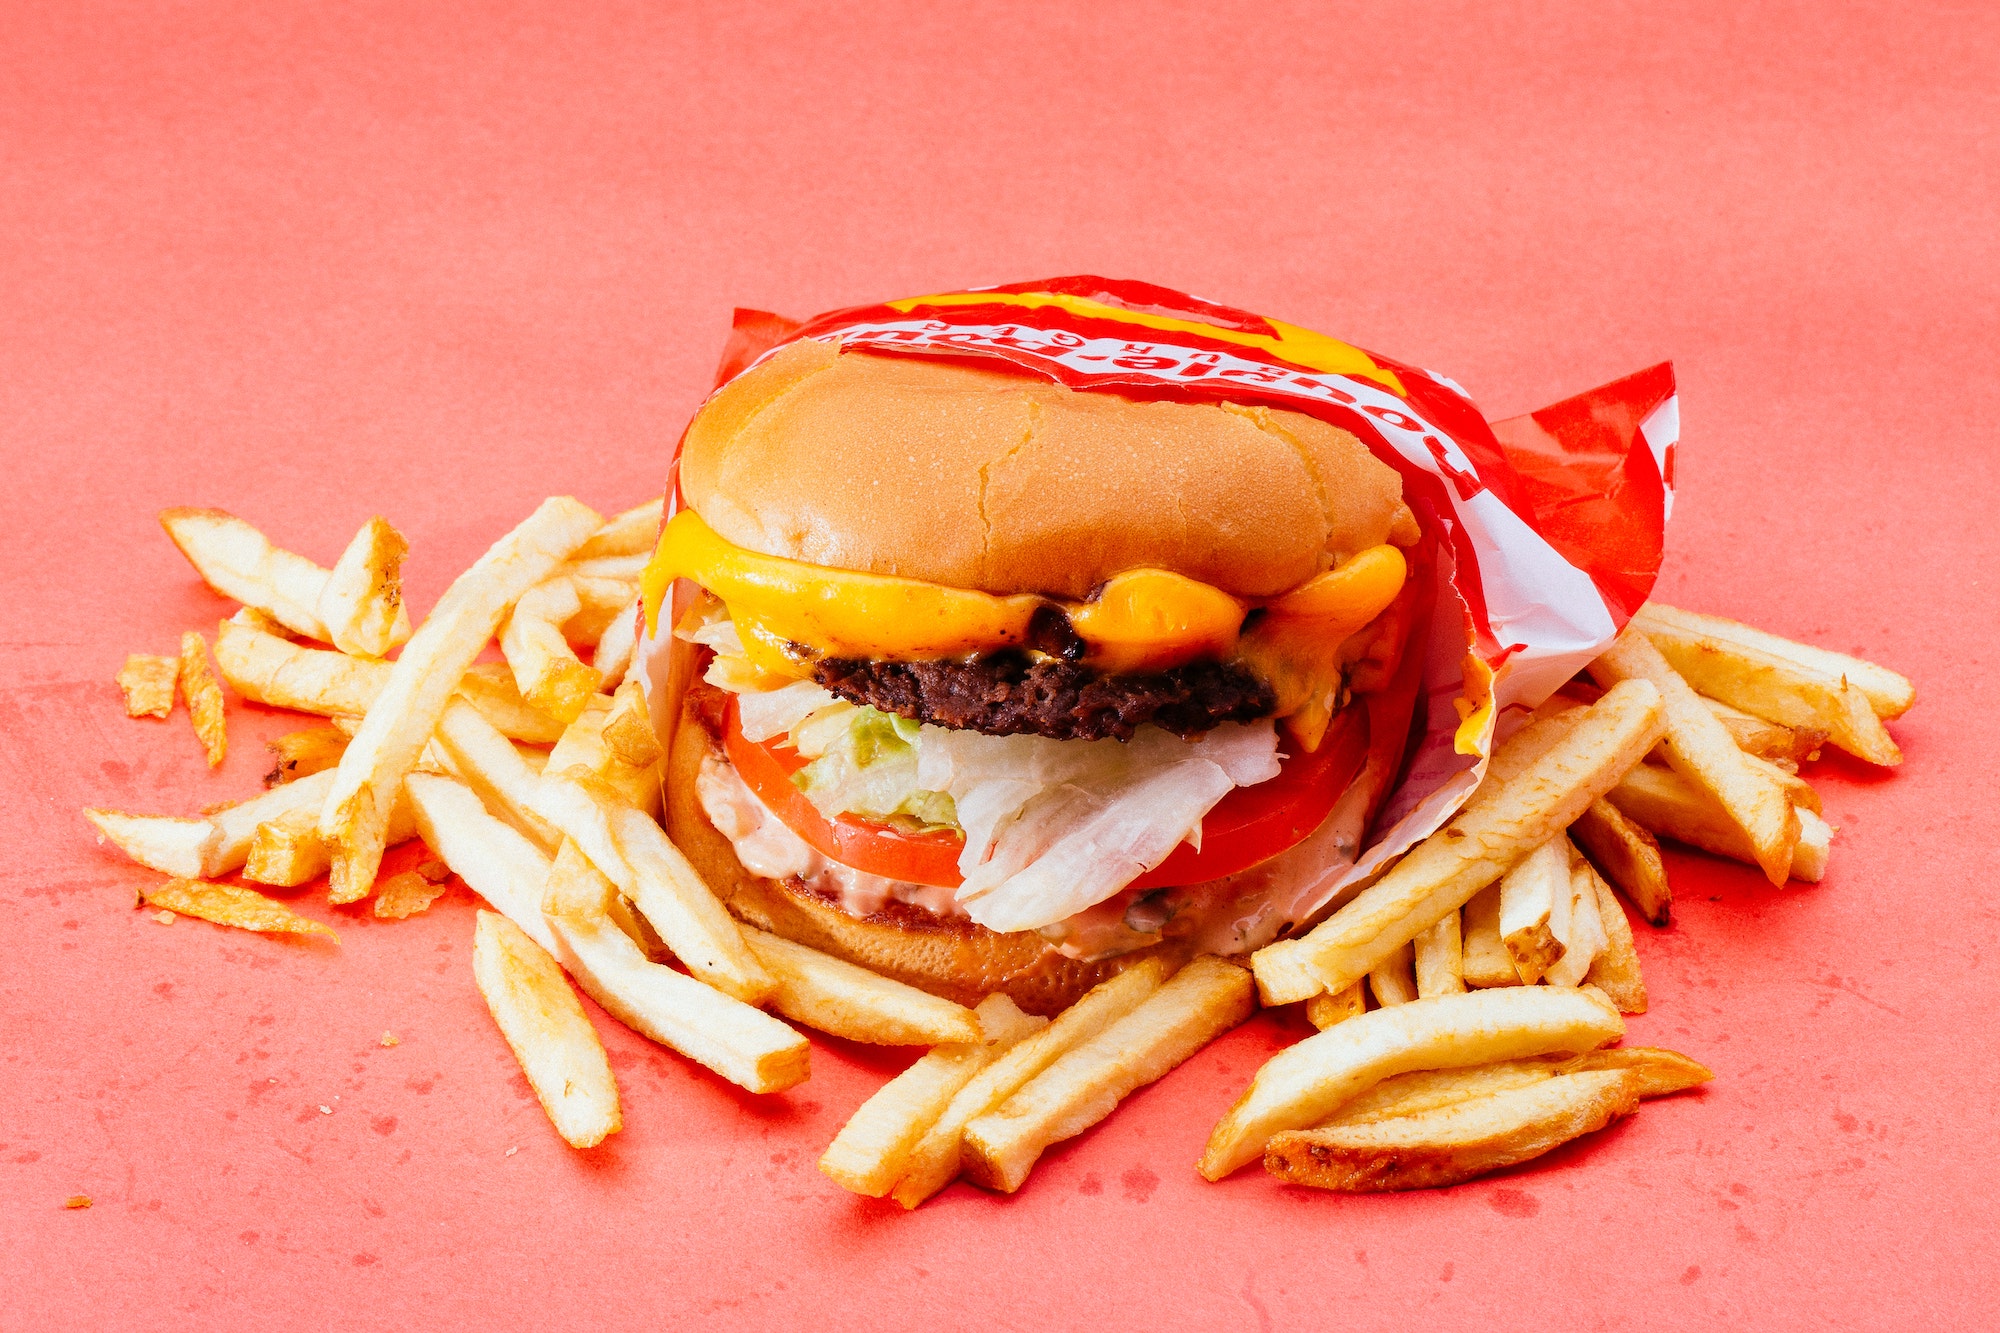 Crazy fast food facts you need to know - Multisport.ph